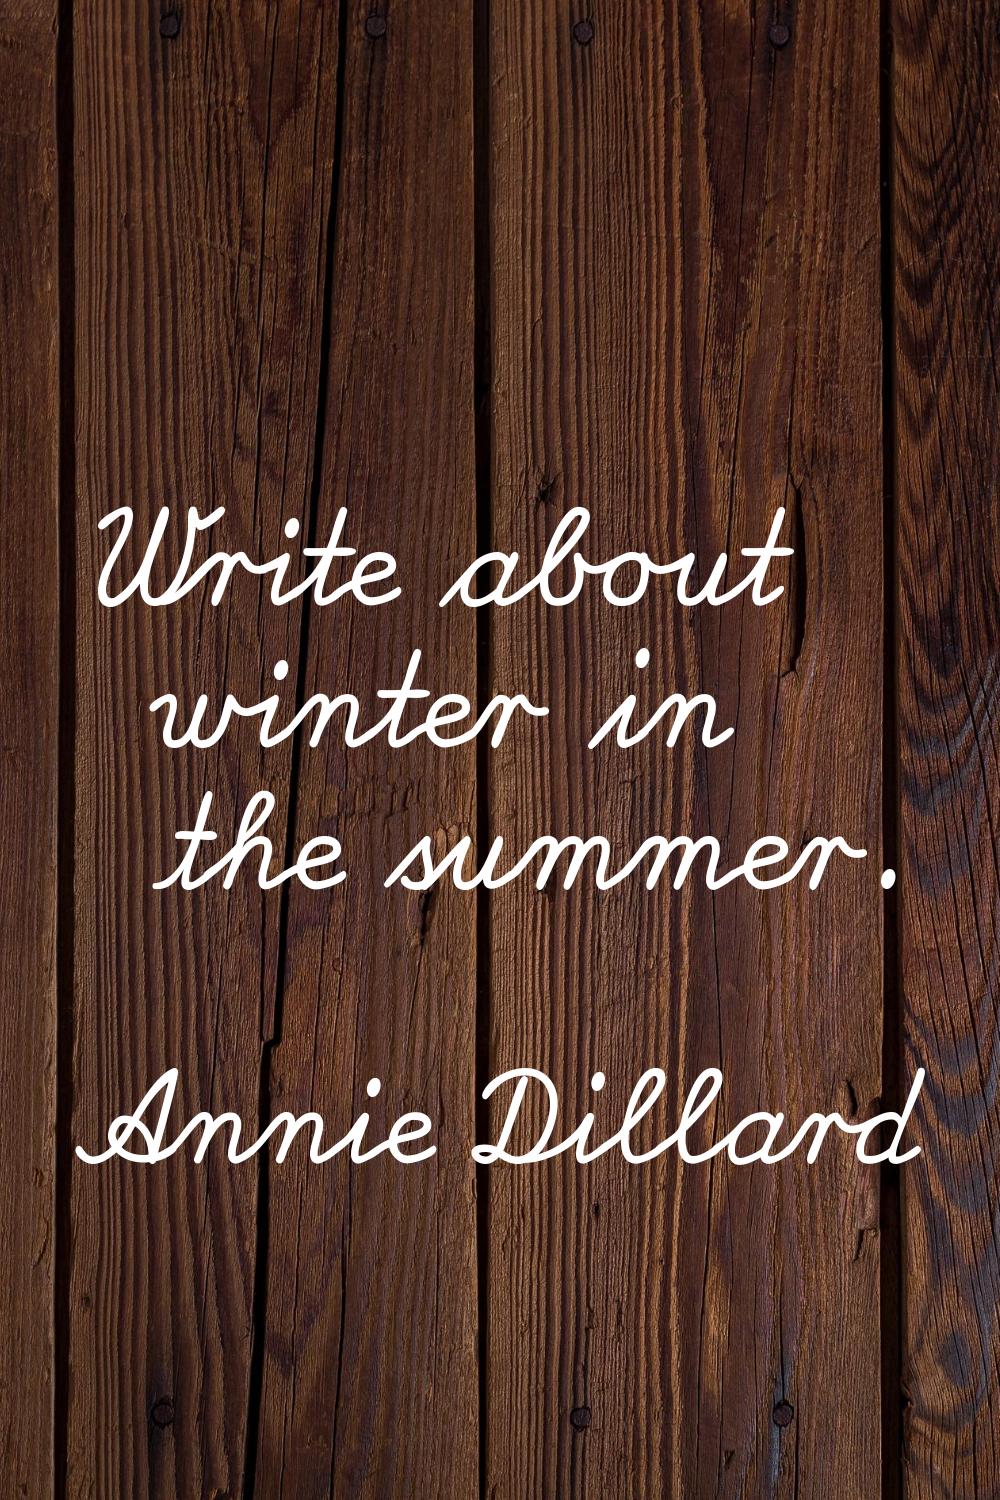 Write about winter in the summer.